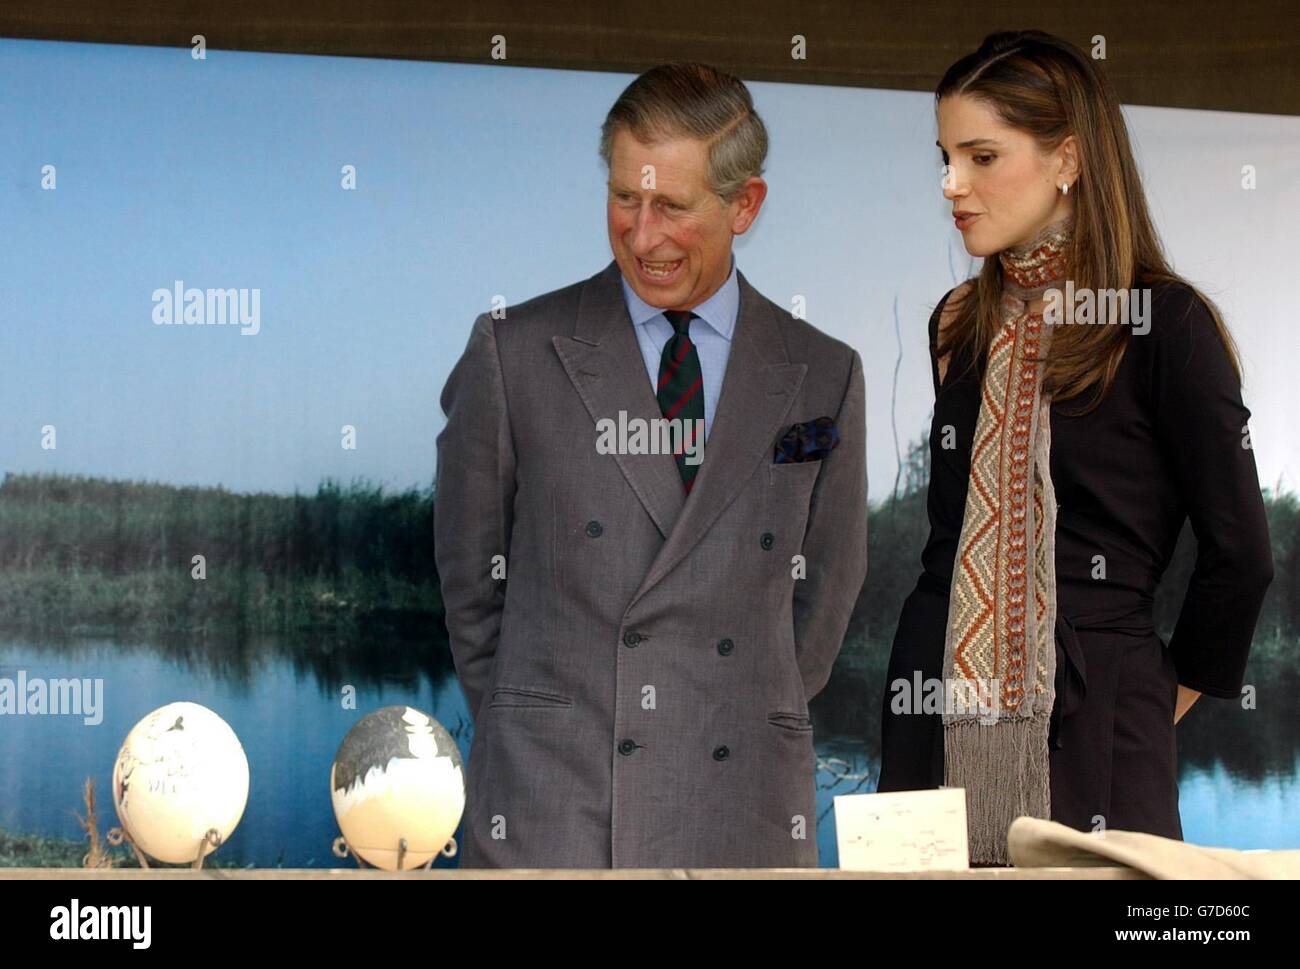 Britain's Prince Charles, the Prince of Wales, (left) laughs with Jordan's Queen Rania as they look at painted eggs at the Ajloun Nature Reserve in Jordan. Stock Photo